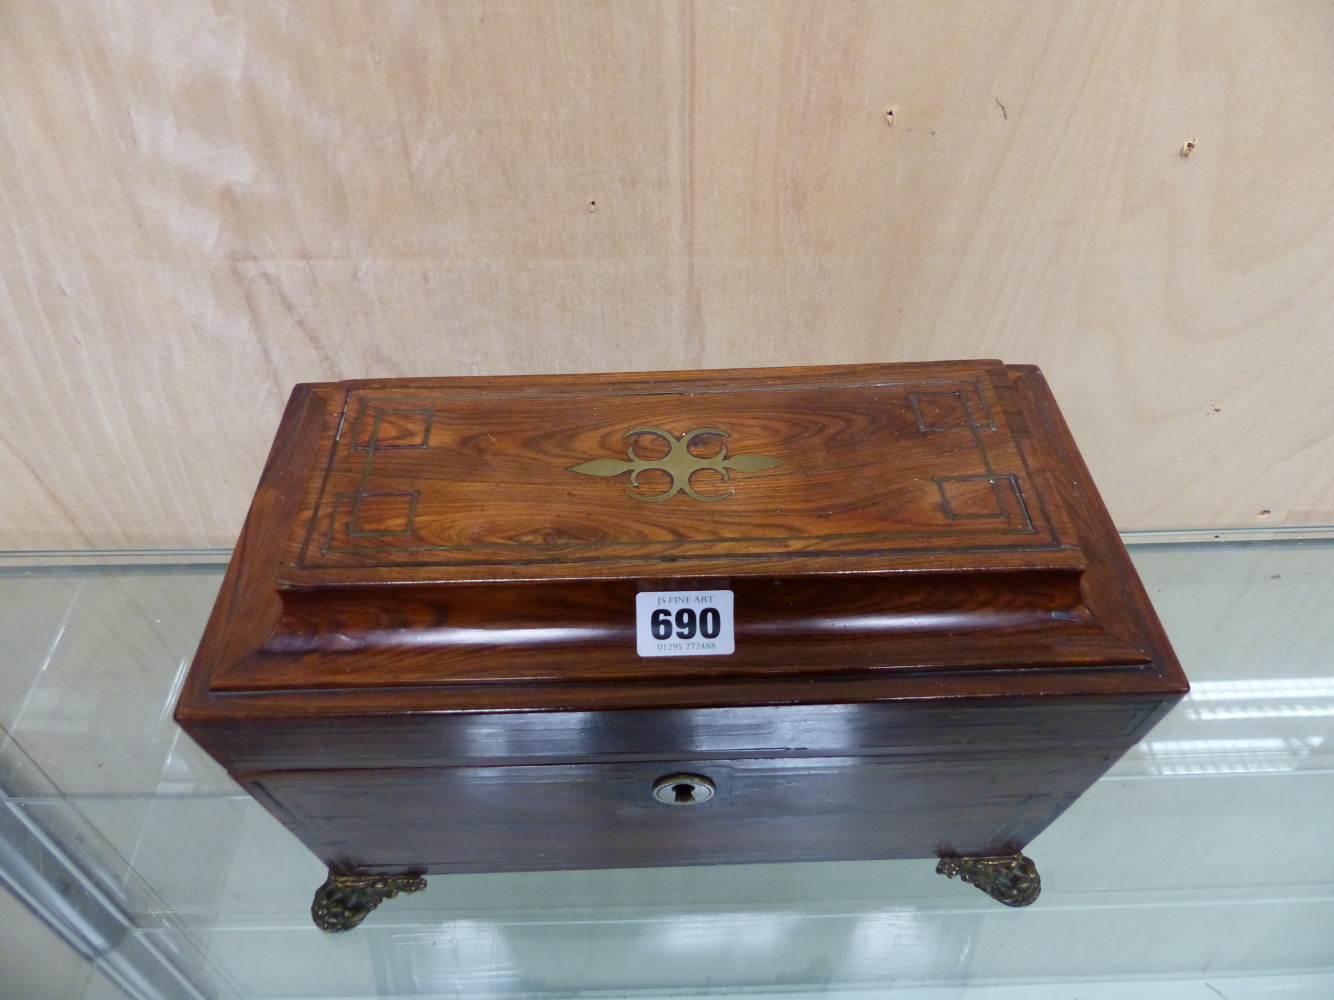 A REGENCY ROSEWOOD AND BRASS INLAID SARCOPHAGUS FORM TEA CADDY WITH BRASS RING HANDLES AND FEET. W. - Image 3 of 7